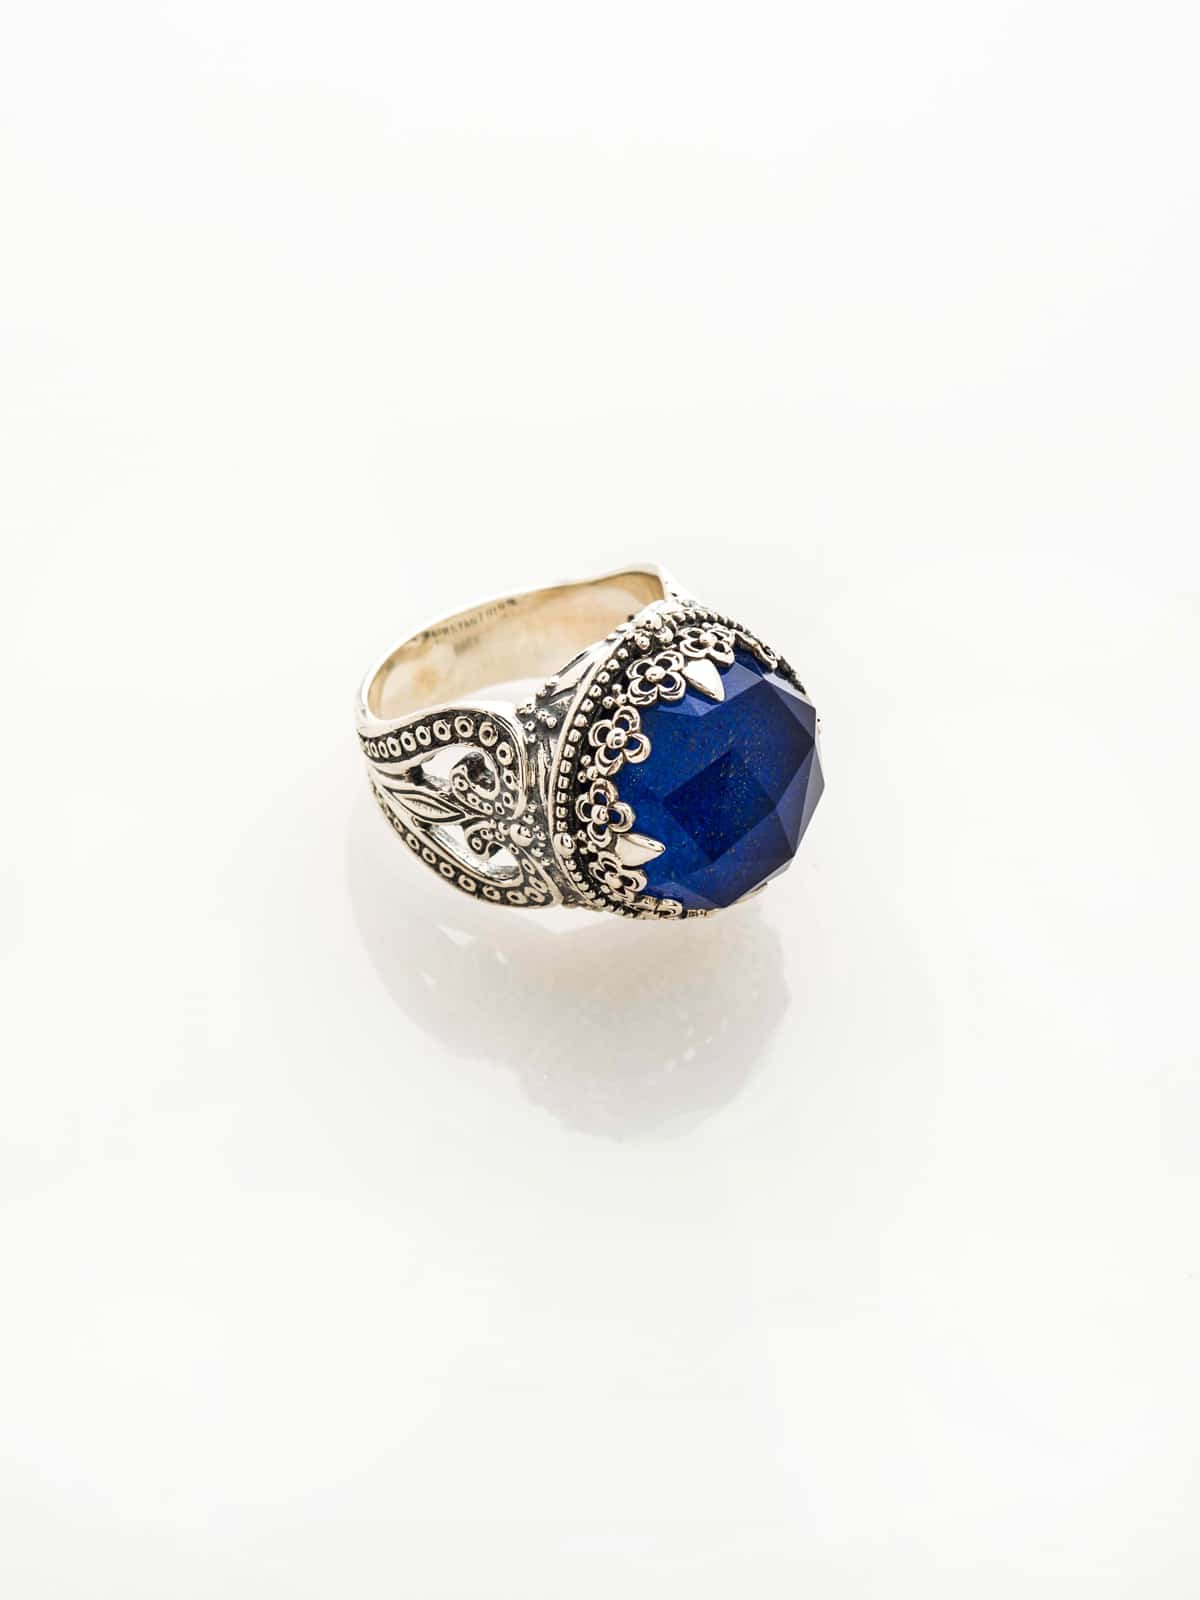 RING WITH LAPIS STONE